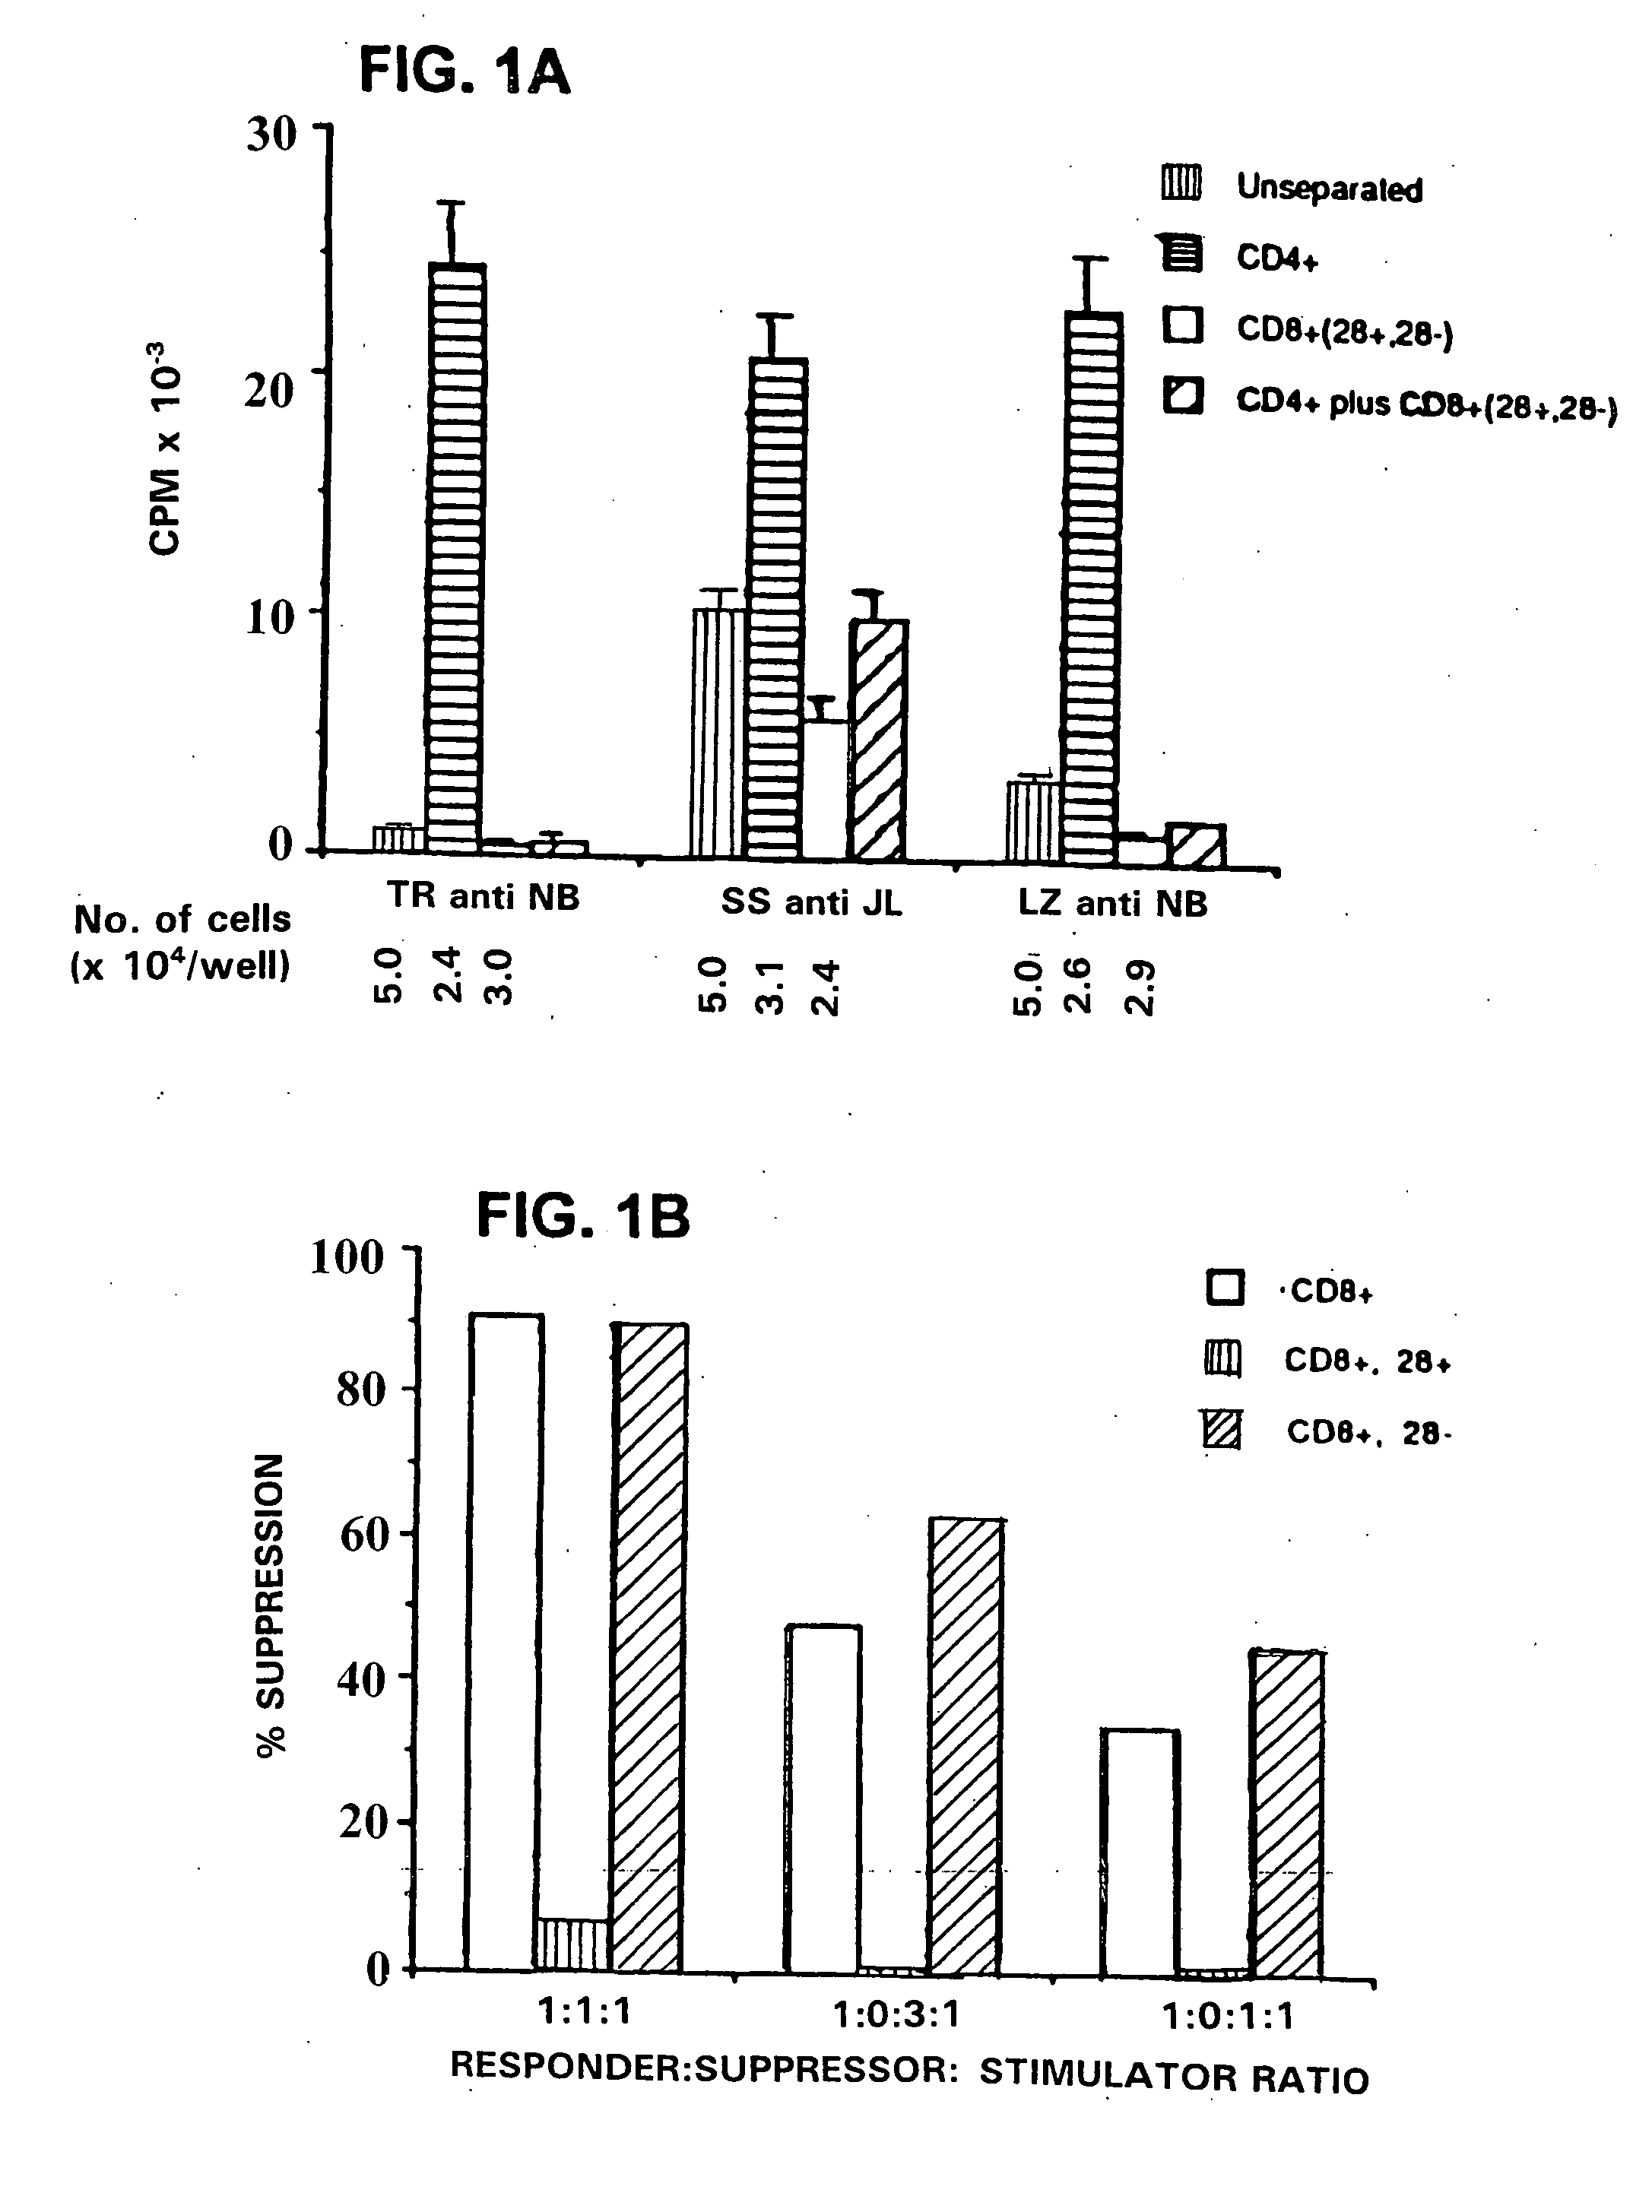 Generation of antigen specific T suppressor cells for treatment of rejection